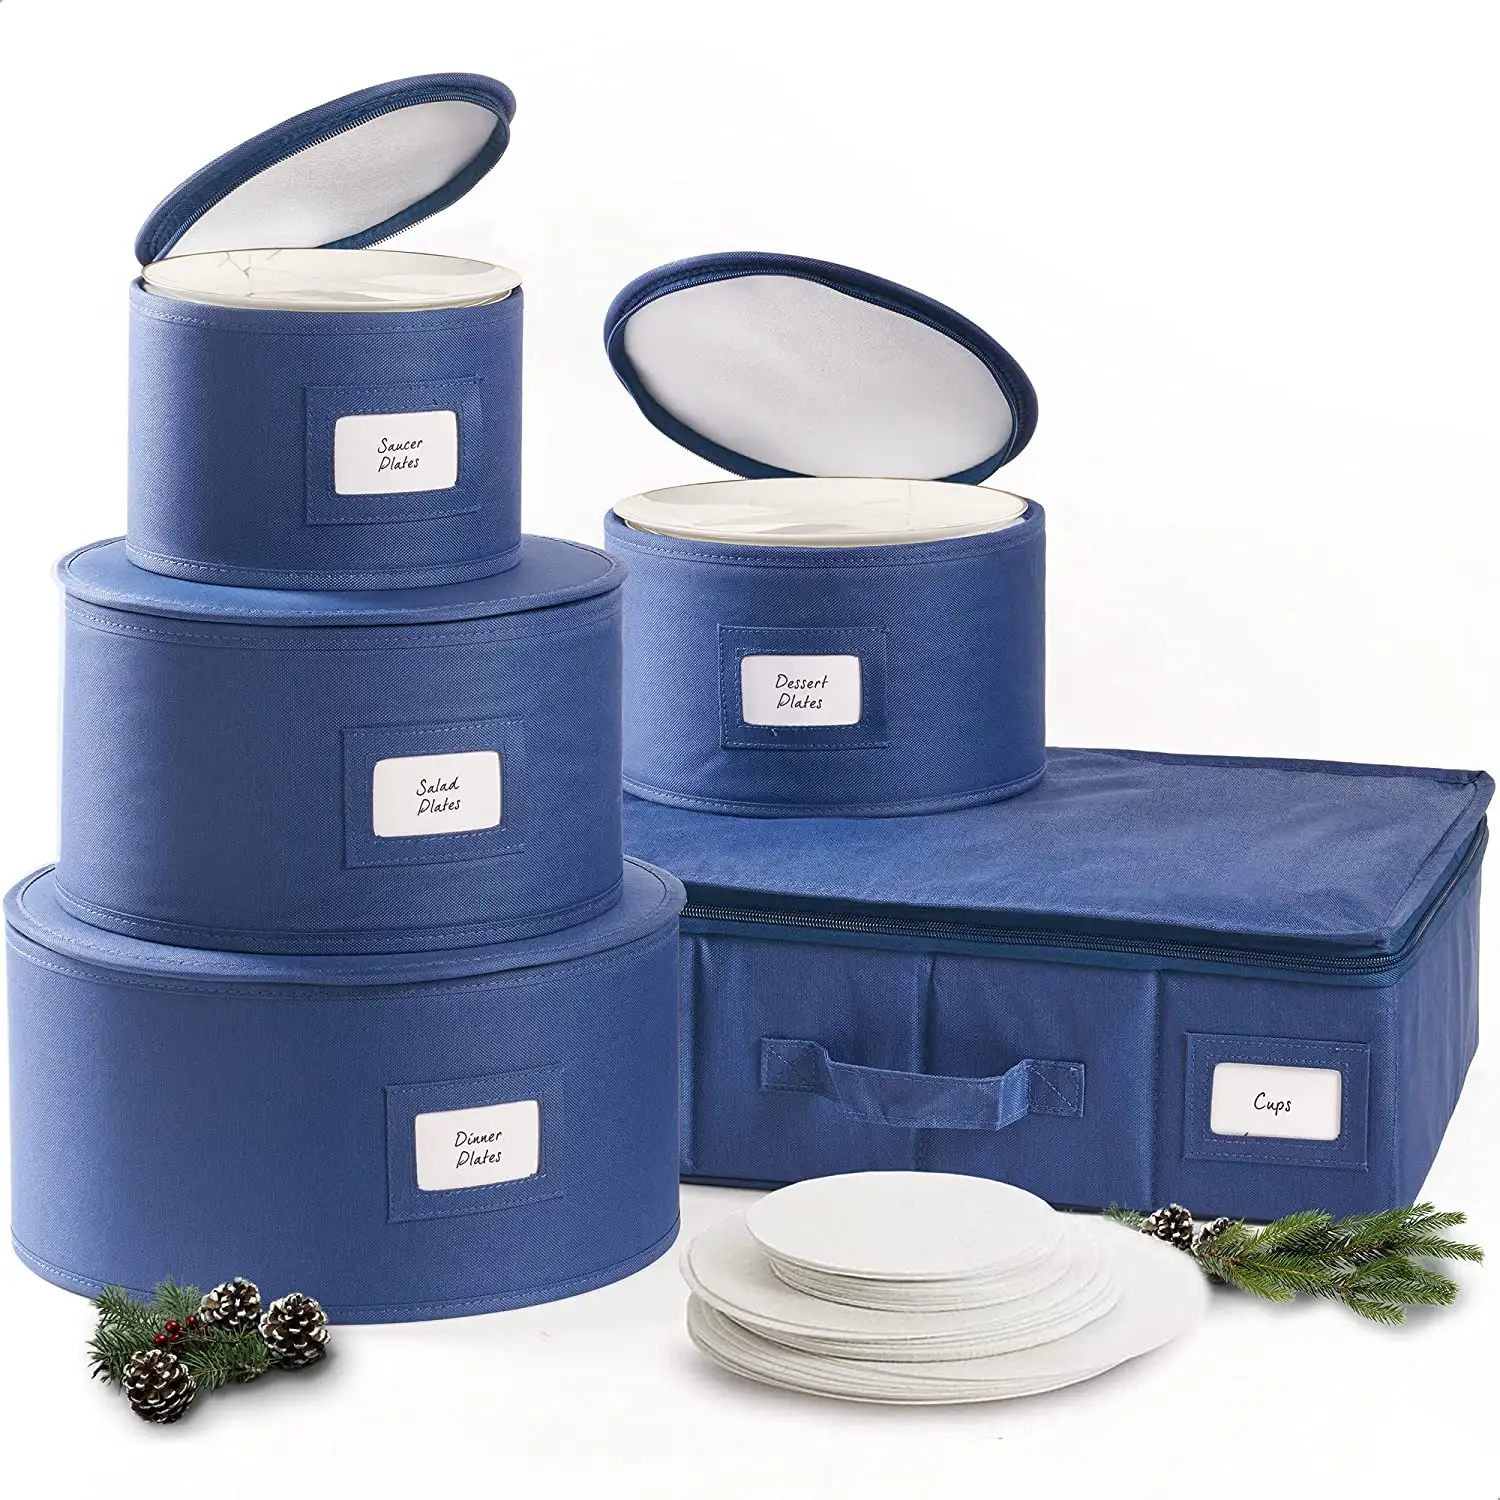 Quisite china Storage Containers Dish Storage Containers com Tampa Hard Shell para mover o transporte, Dinnerware Storage